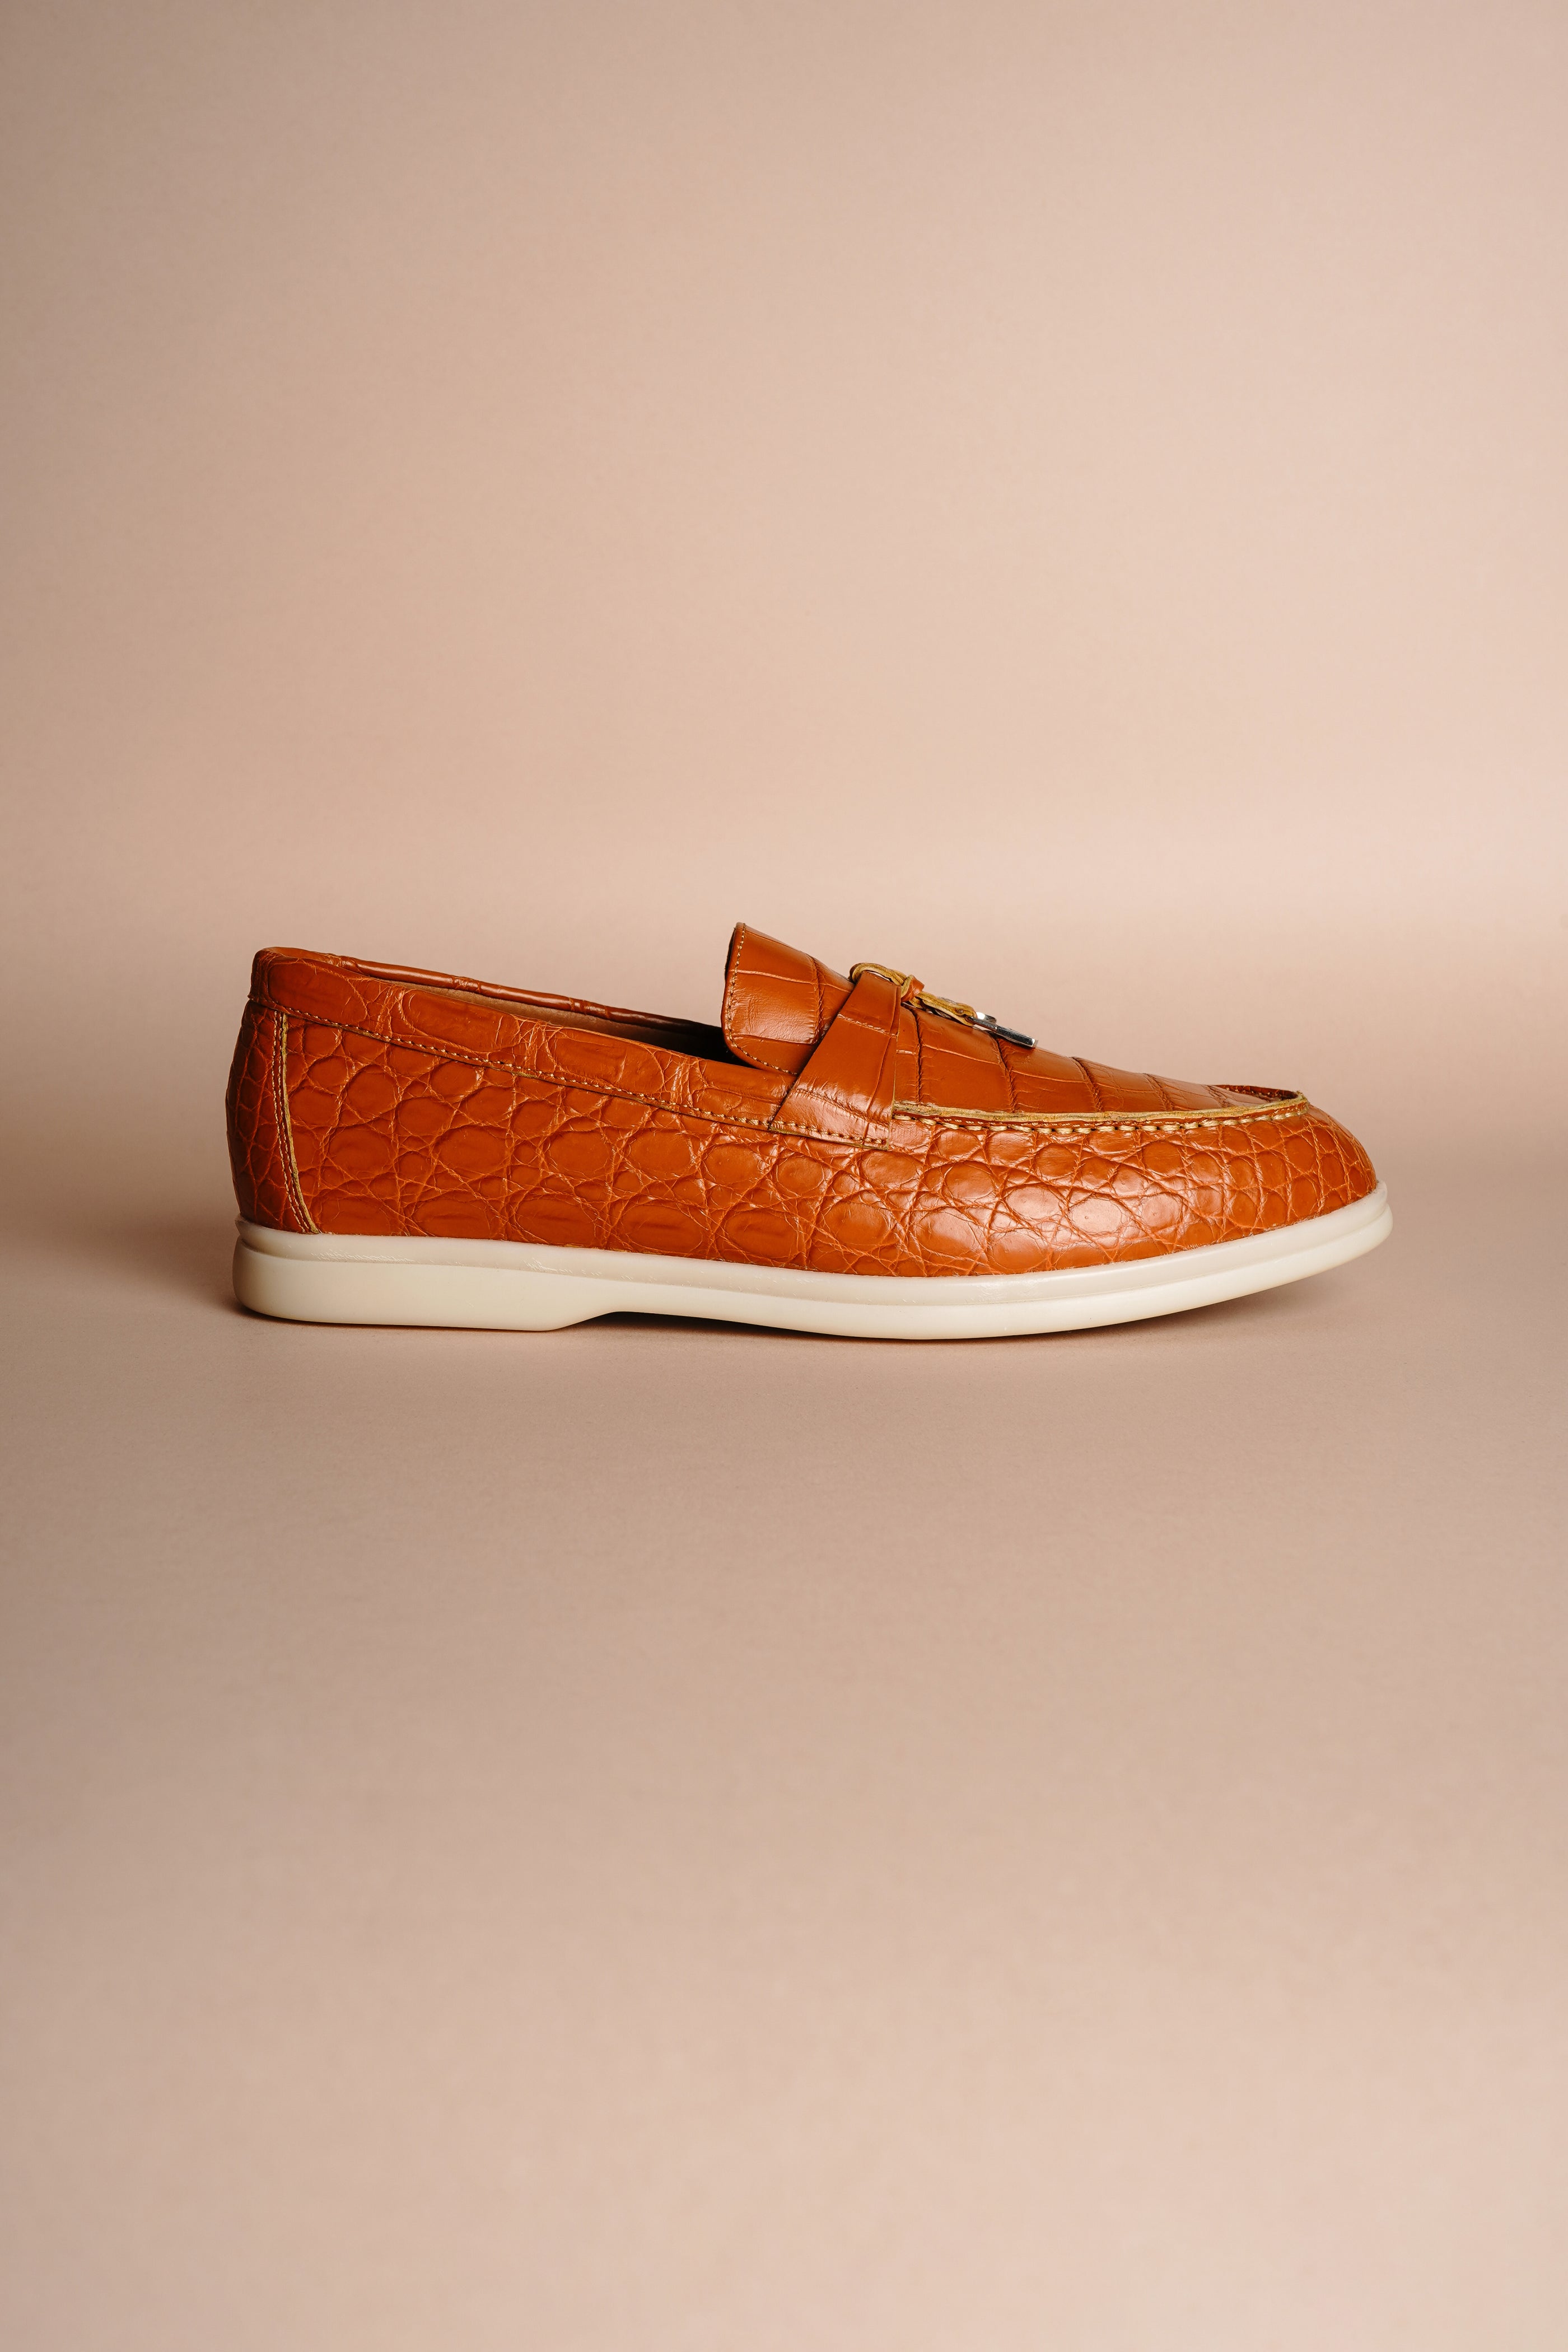 Arundel Loafers